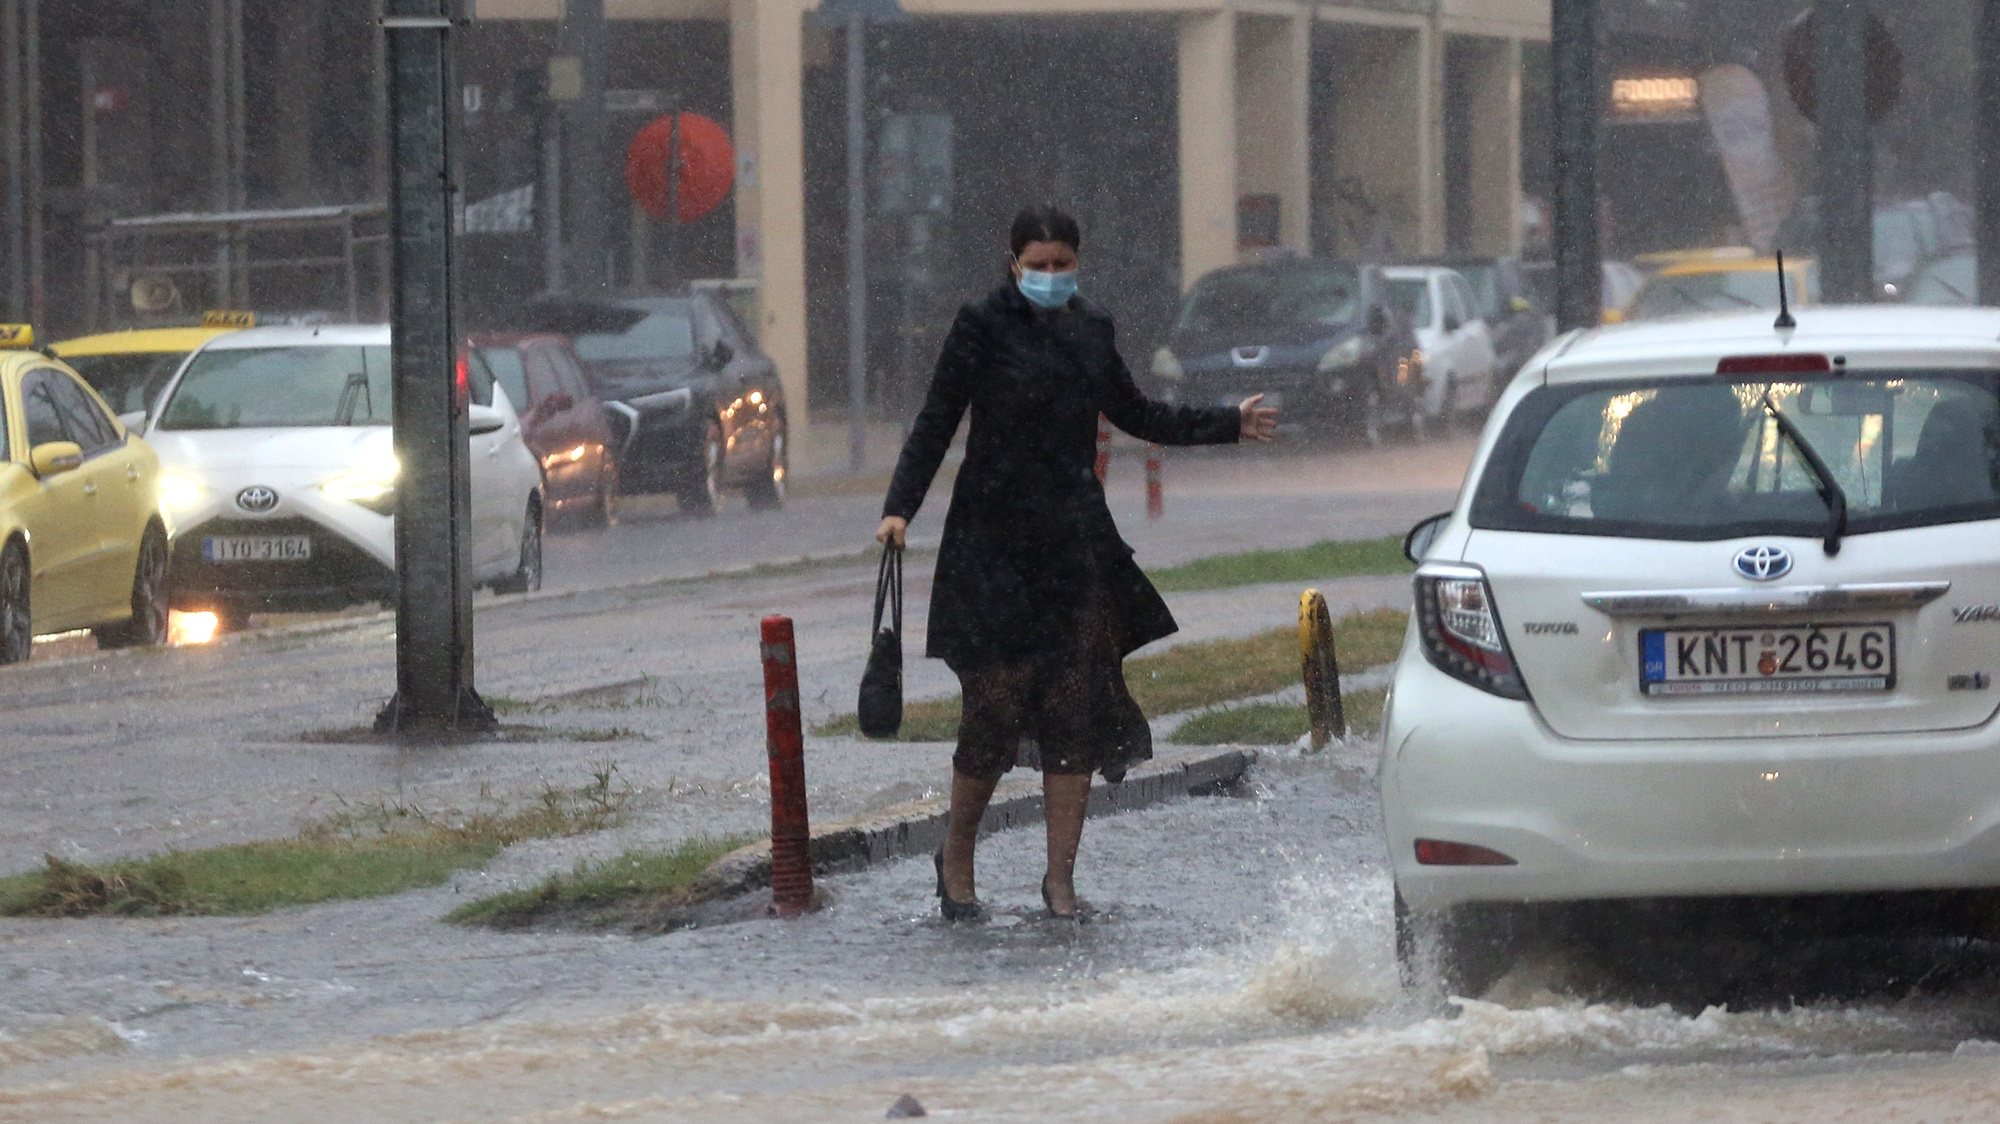 epa09523317 A woman makes her way under heavy rain in Athens, Greece, 14 October 2021. An emergency warning was sent to Attica residents from the 112 Emergency Communications Service on 14 October warning them of dangerous weather conditions and to avoid all non-essential travel.  EPA/ORESTIS PANAGIOTOU